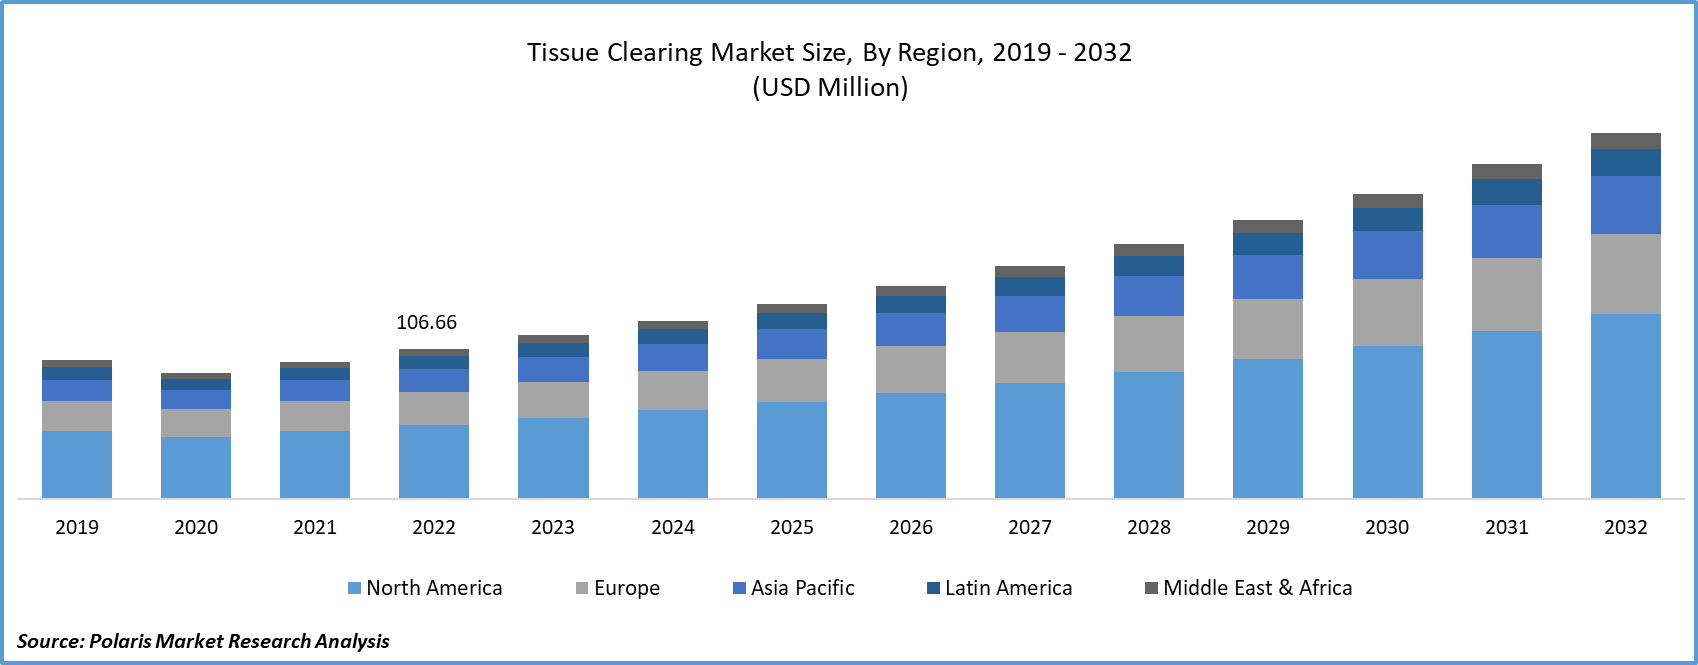 Tissue Clearing Market Size